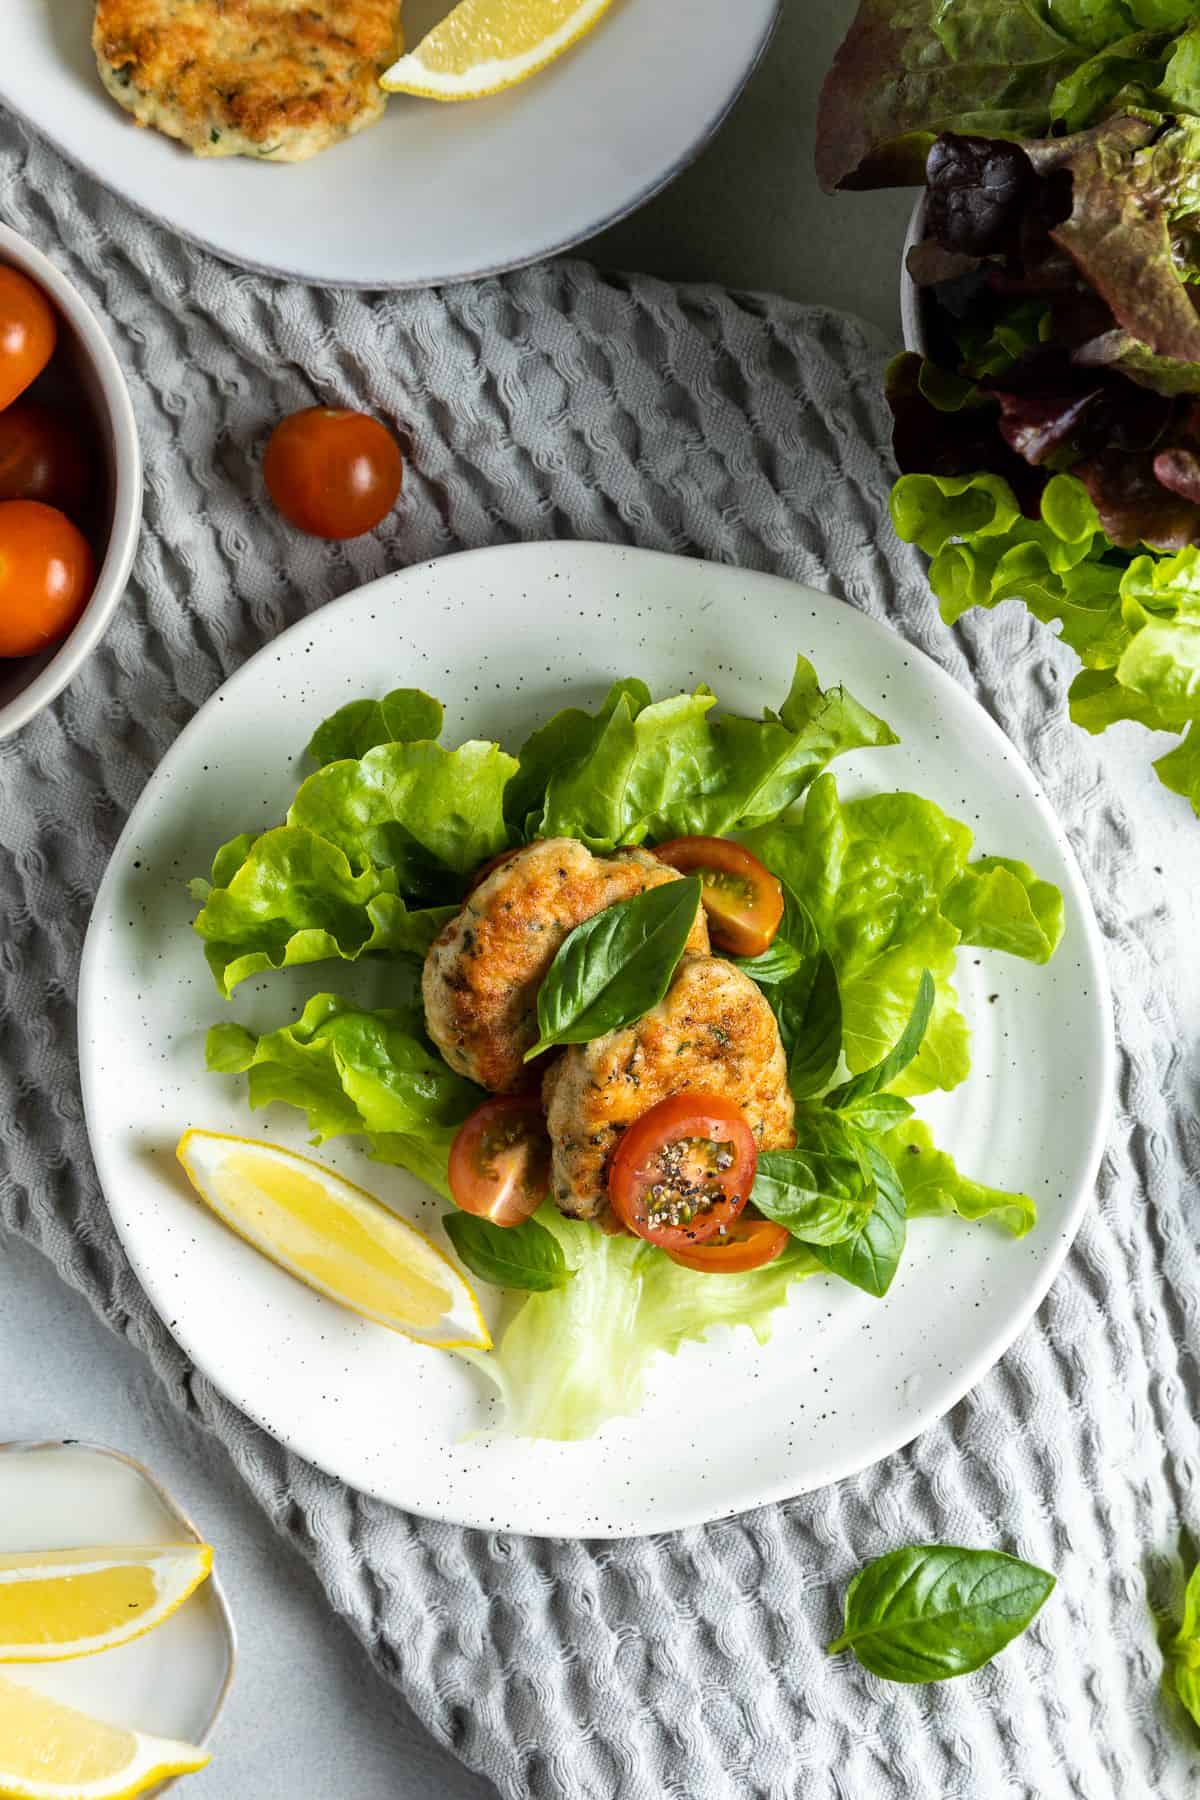 Serve of chicken patties on a bed of salad.